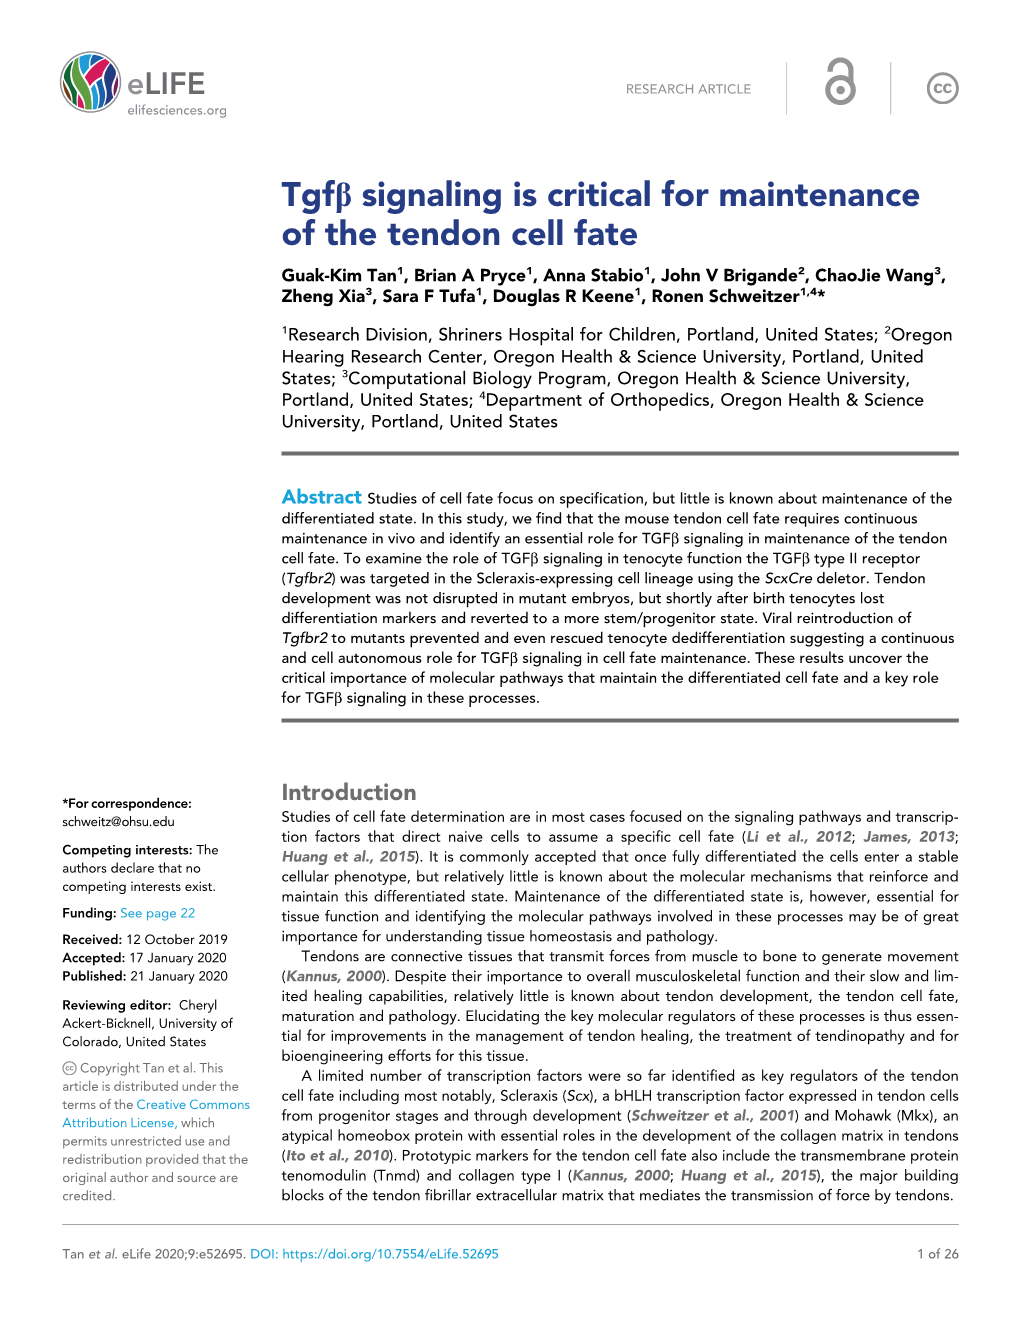 Tgfb Signaling Is Critical for Maintenance of the Tendon Cell Fate